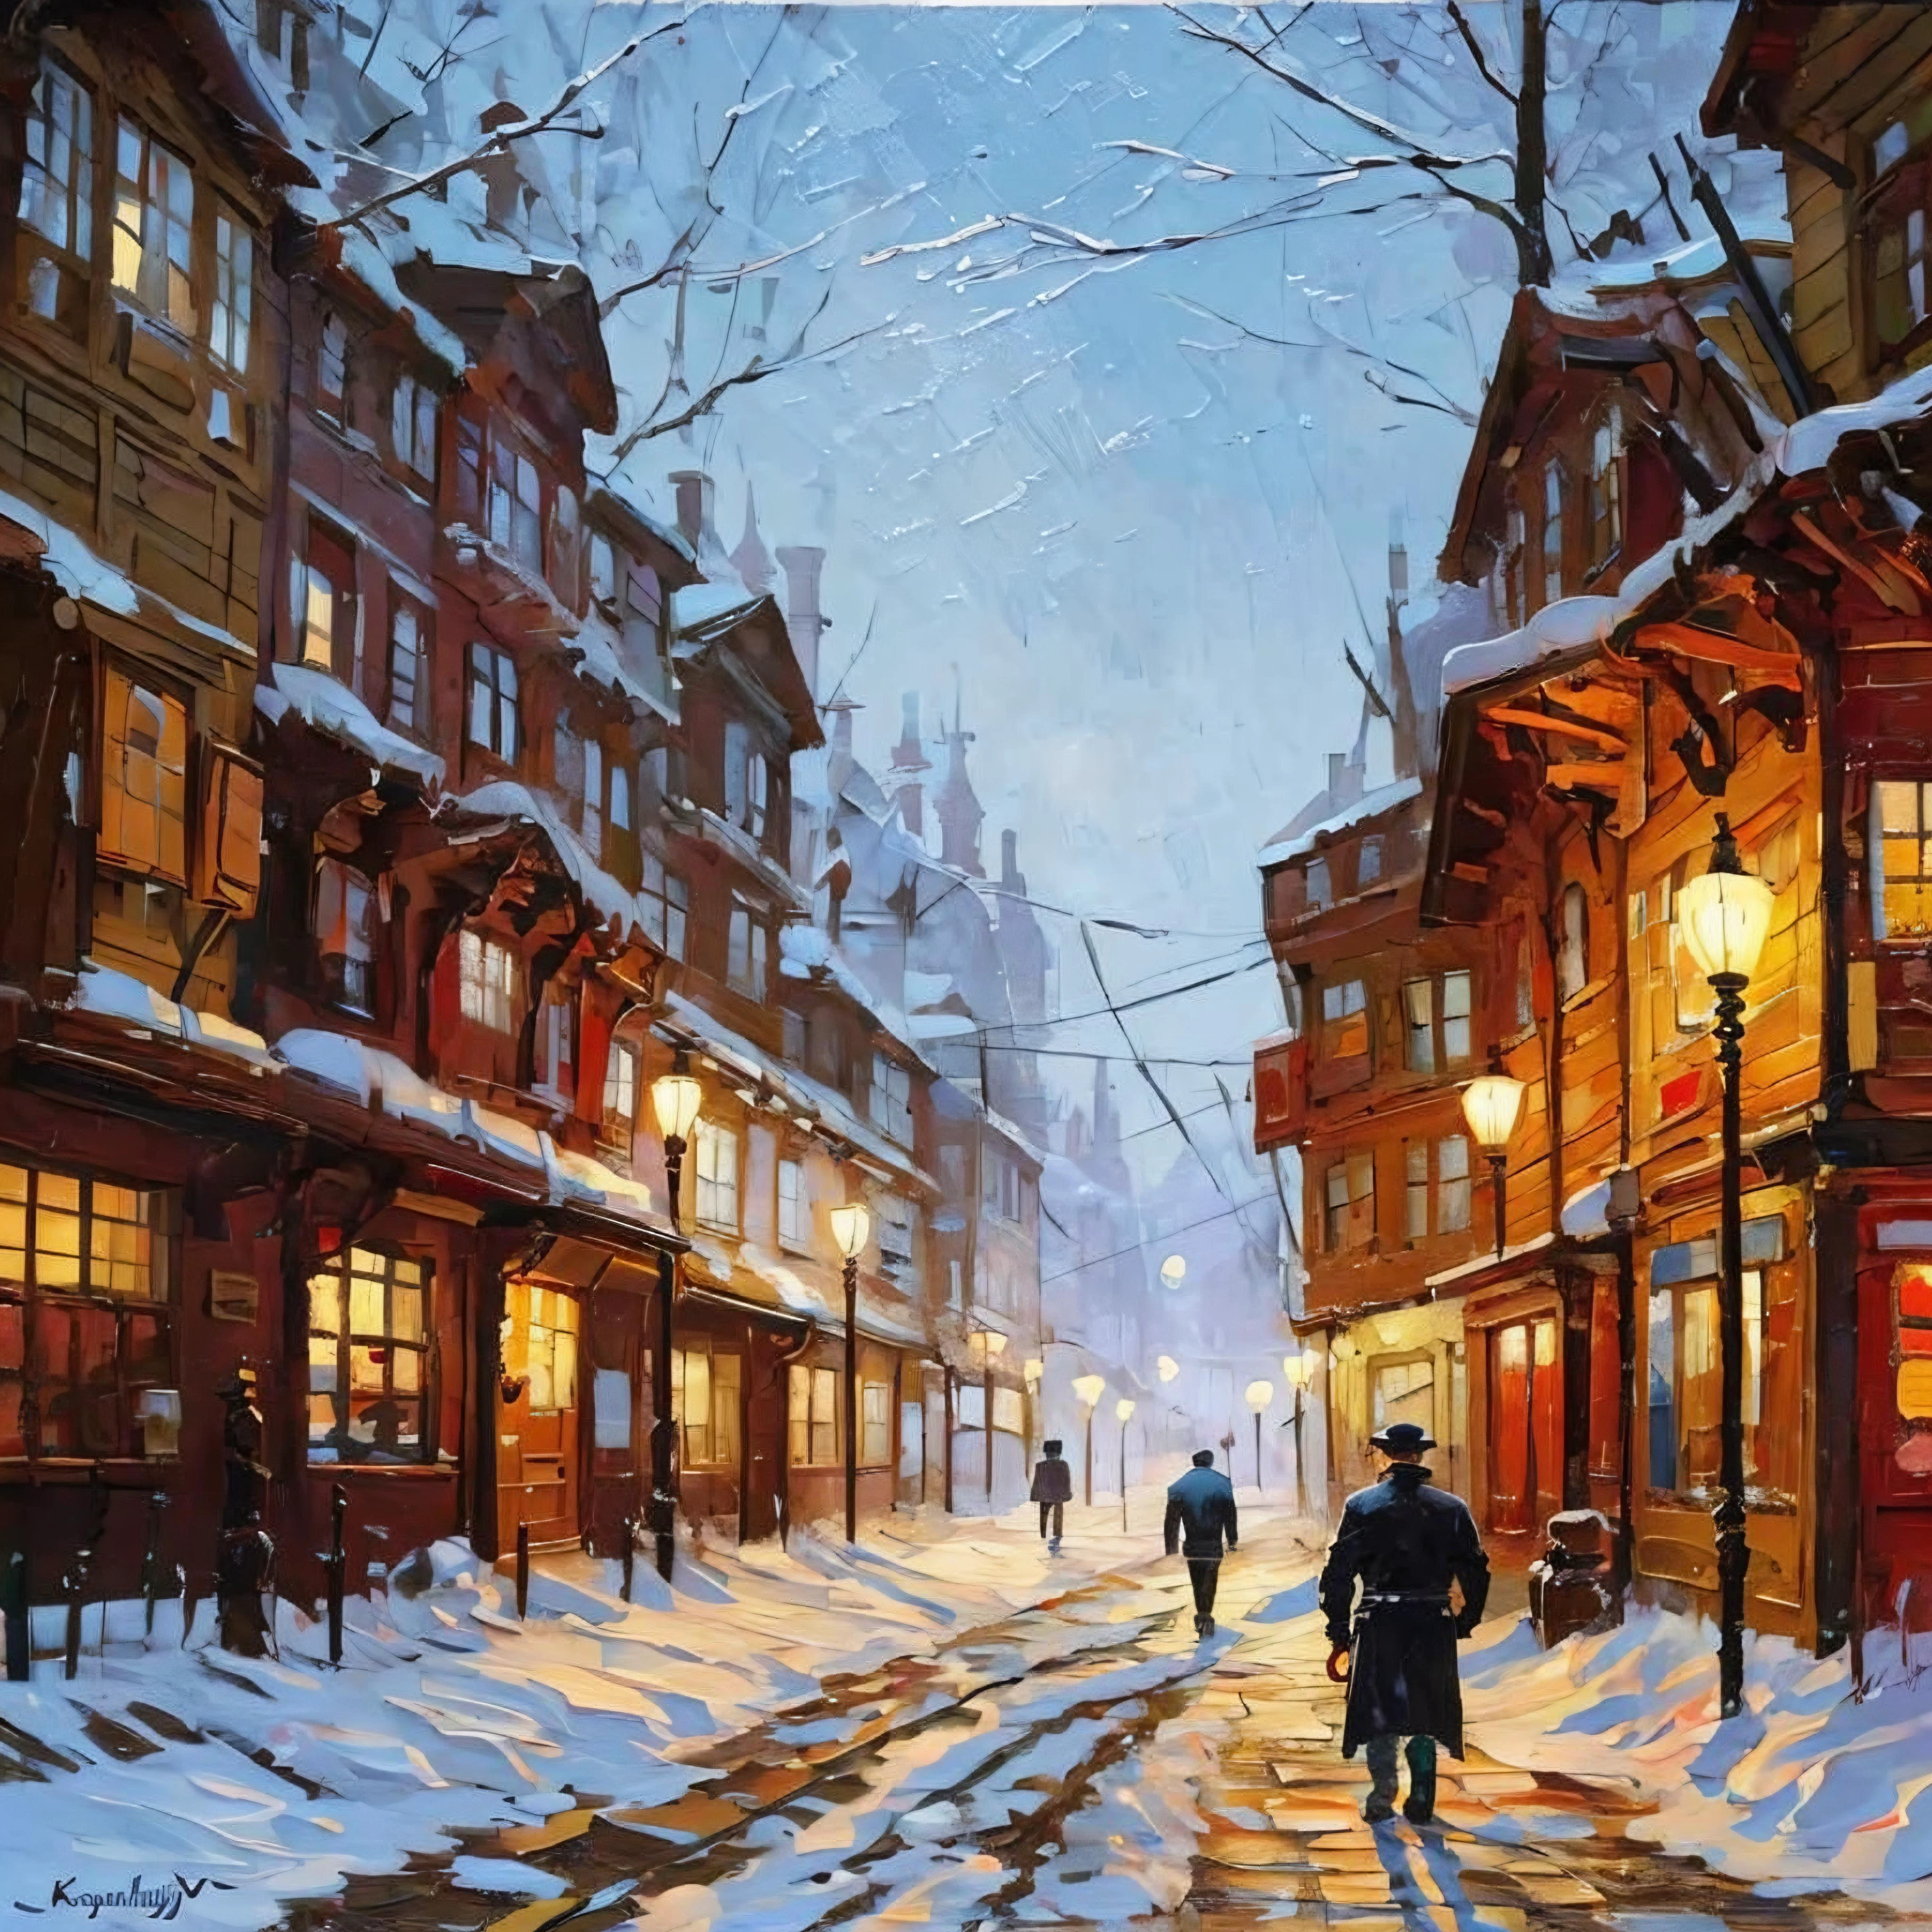 a painting of a man walking down a snowy street, inspired by Vladimir Makovsky, inspired by Vasily Surikov, inspired by Nikolay Makovsky, inspired by Aleksandr Ivanovich Laktionov, inspired by Konstantin Makovsky, inspired by Yuri Ivanovich Pimenov, inspired by Tibor Rényi, soviet paintings, inspired by F Scott Hess 